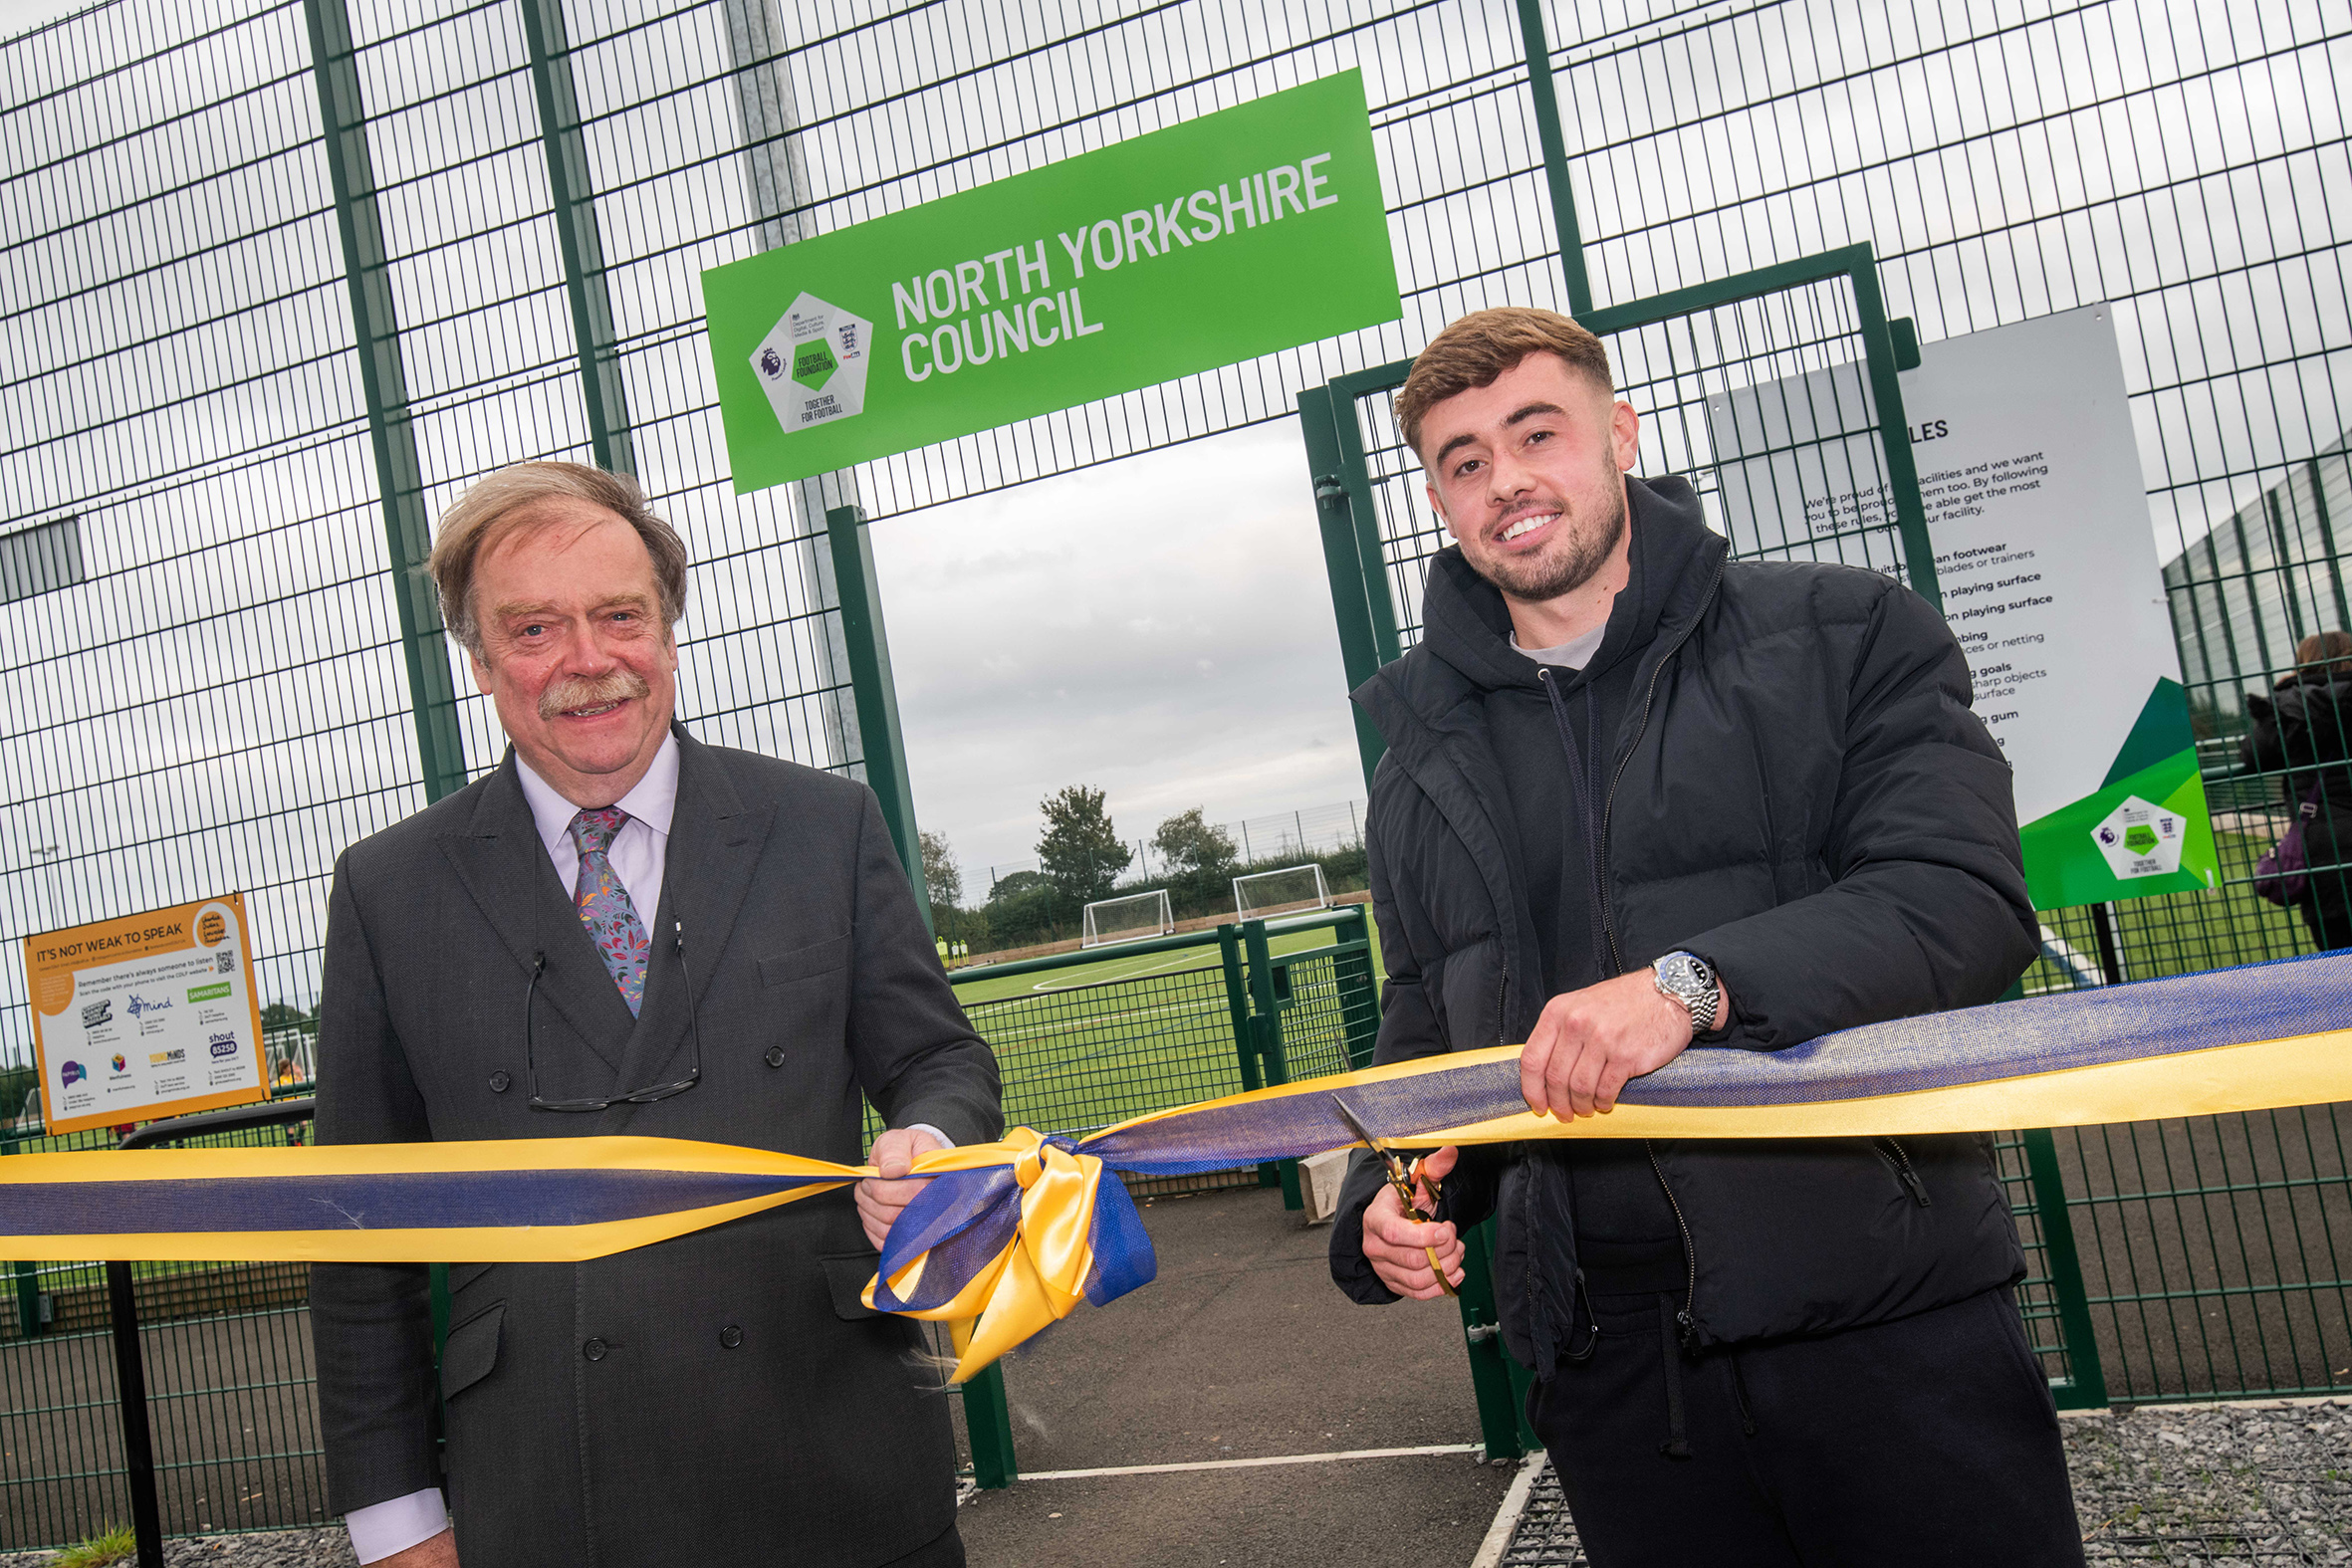 Cllr Simon Myers and professional footballer Alfie McCalmont cut the ribbon to officially open the new 3G pitch and pavilion in Sowerby.